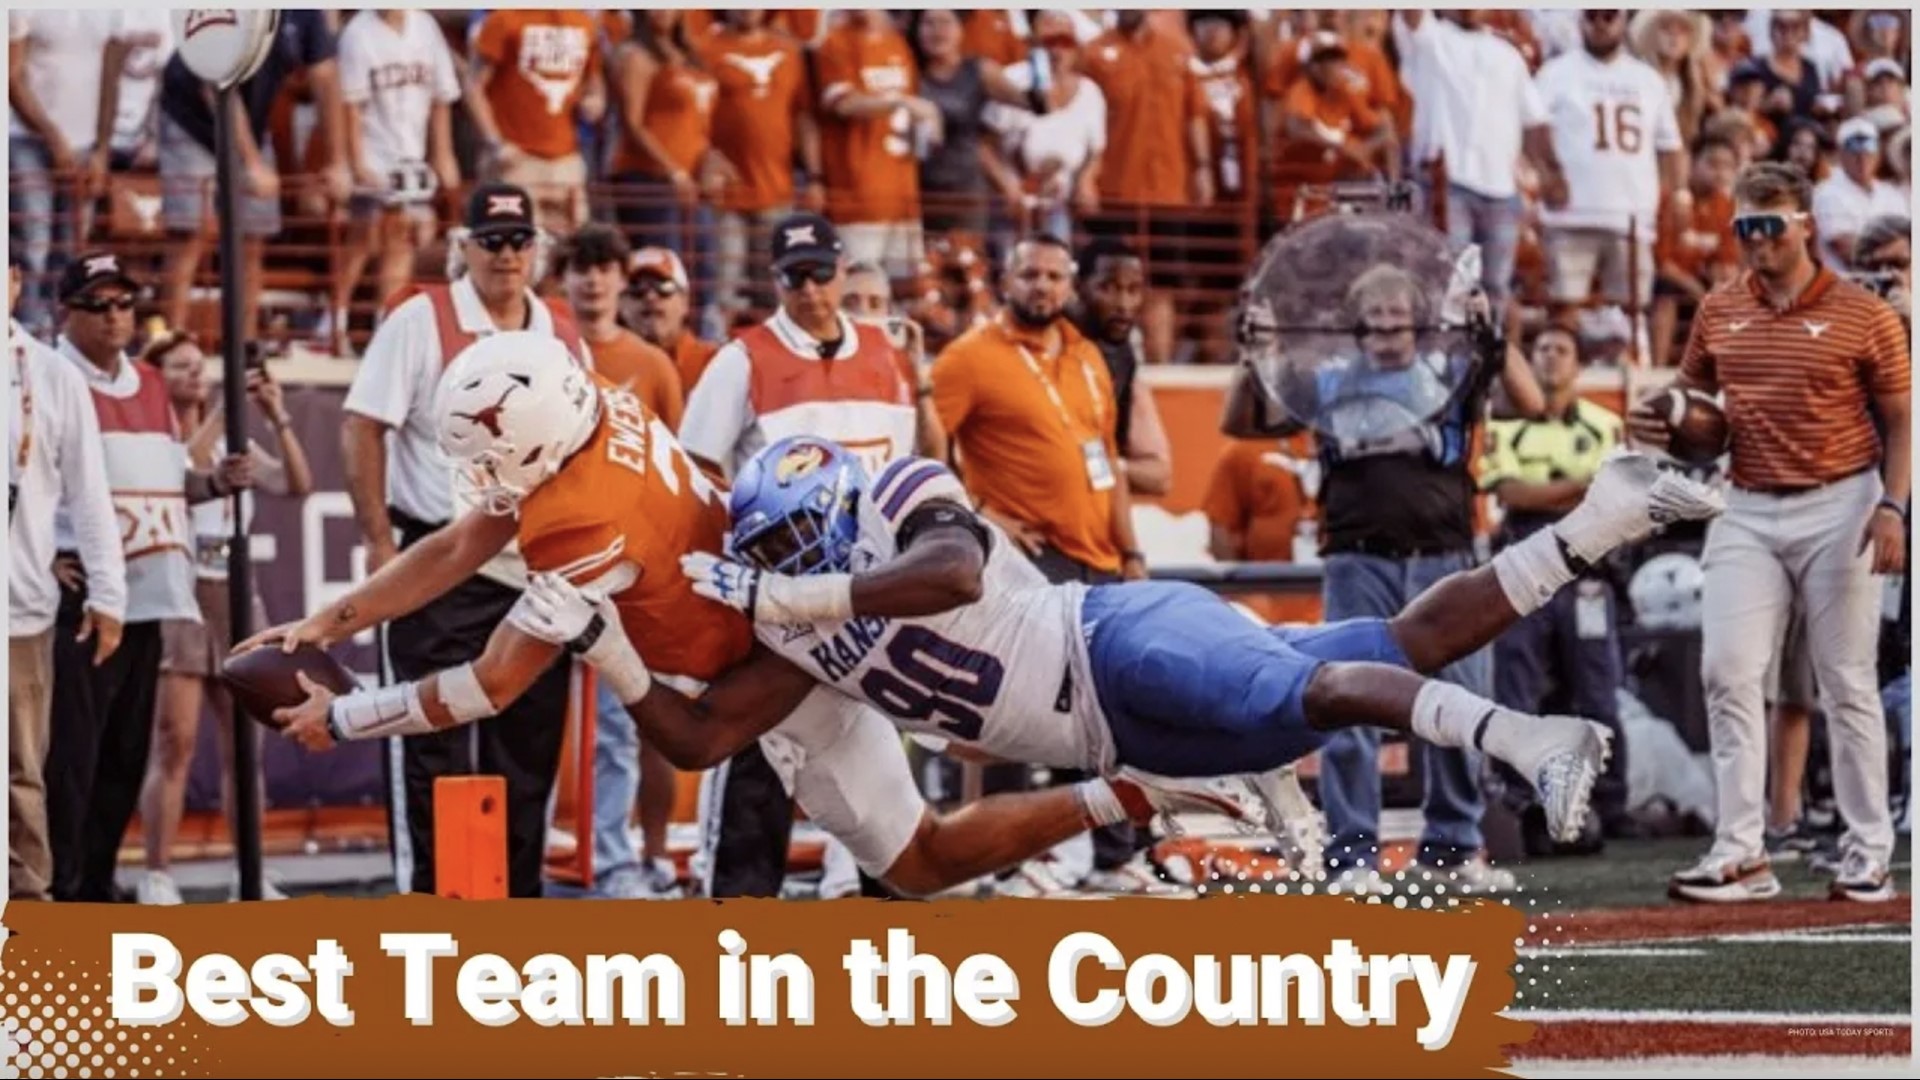 After a truly embarrassing loss in 2021 to the Kansas Jayhawks, the Texas Longhorns have been nothing short of dominant against them in two meetings since.